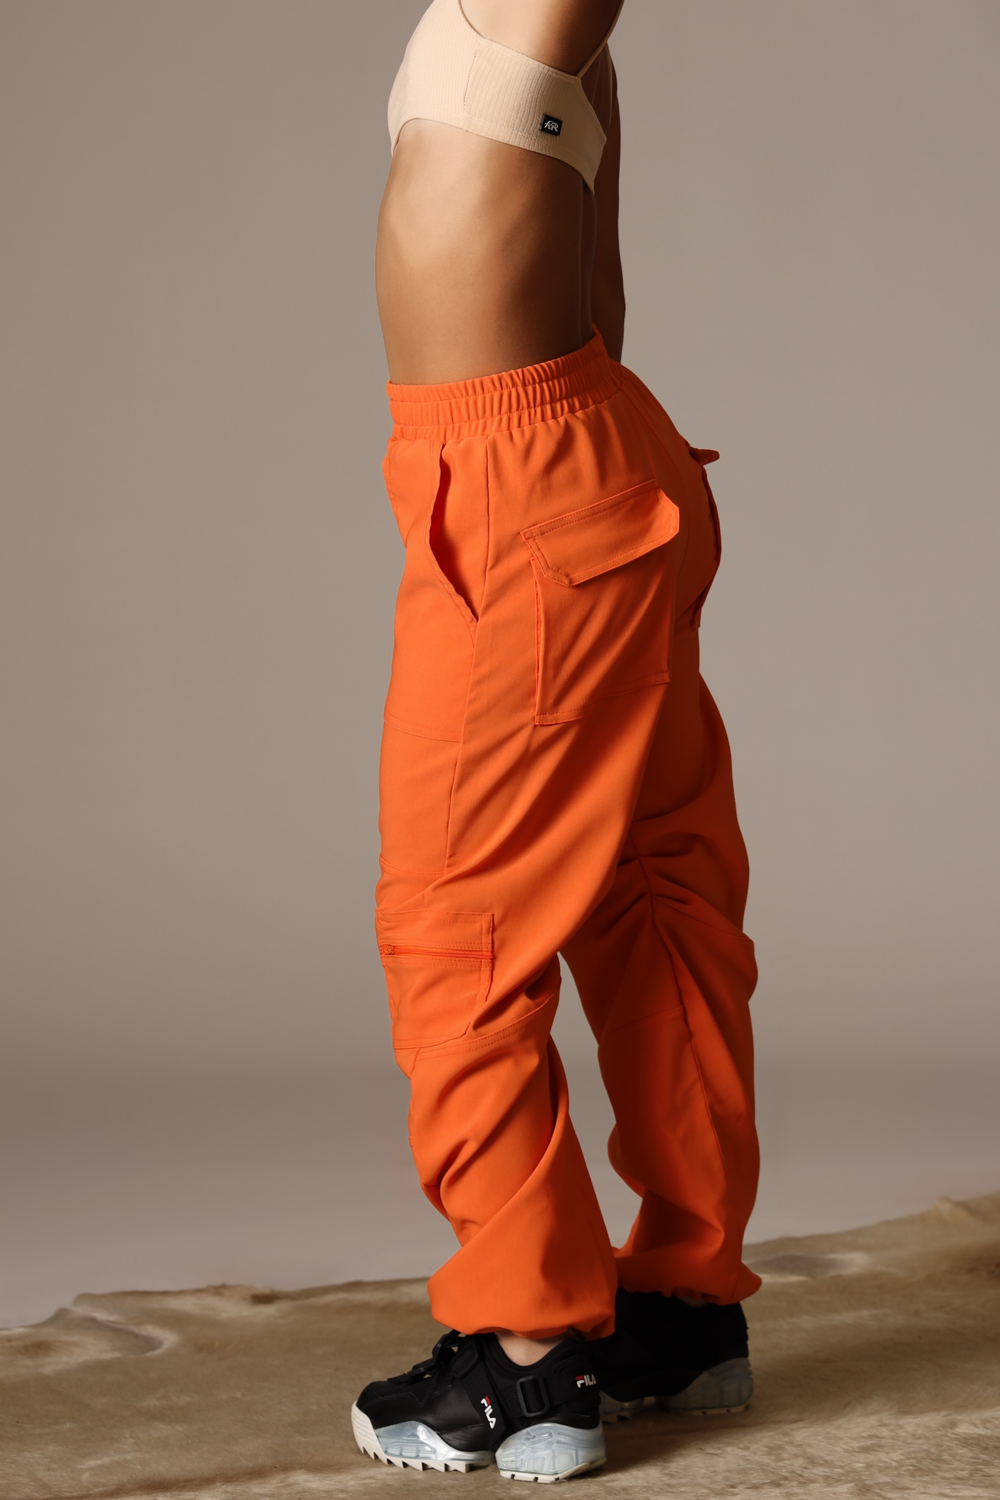 Obsessed with the new dance studio cargo pants from lululemon